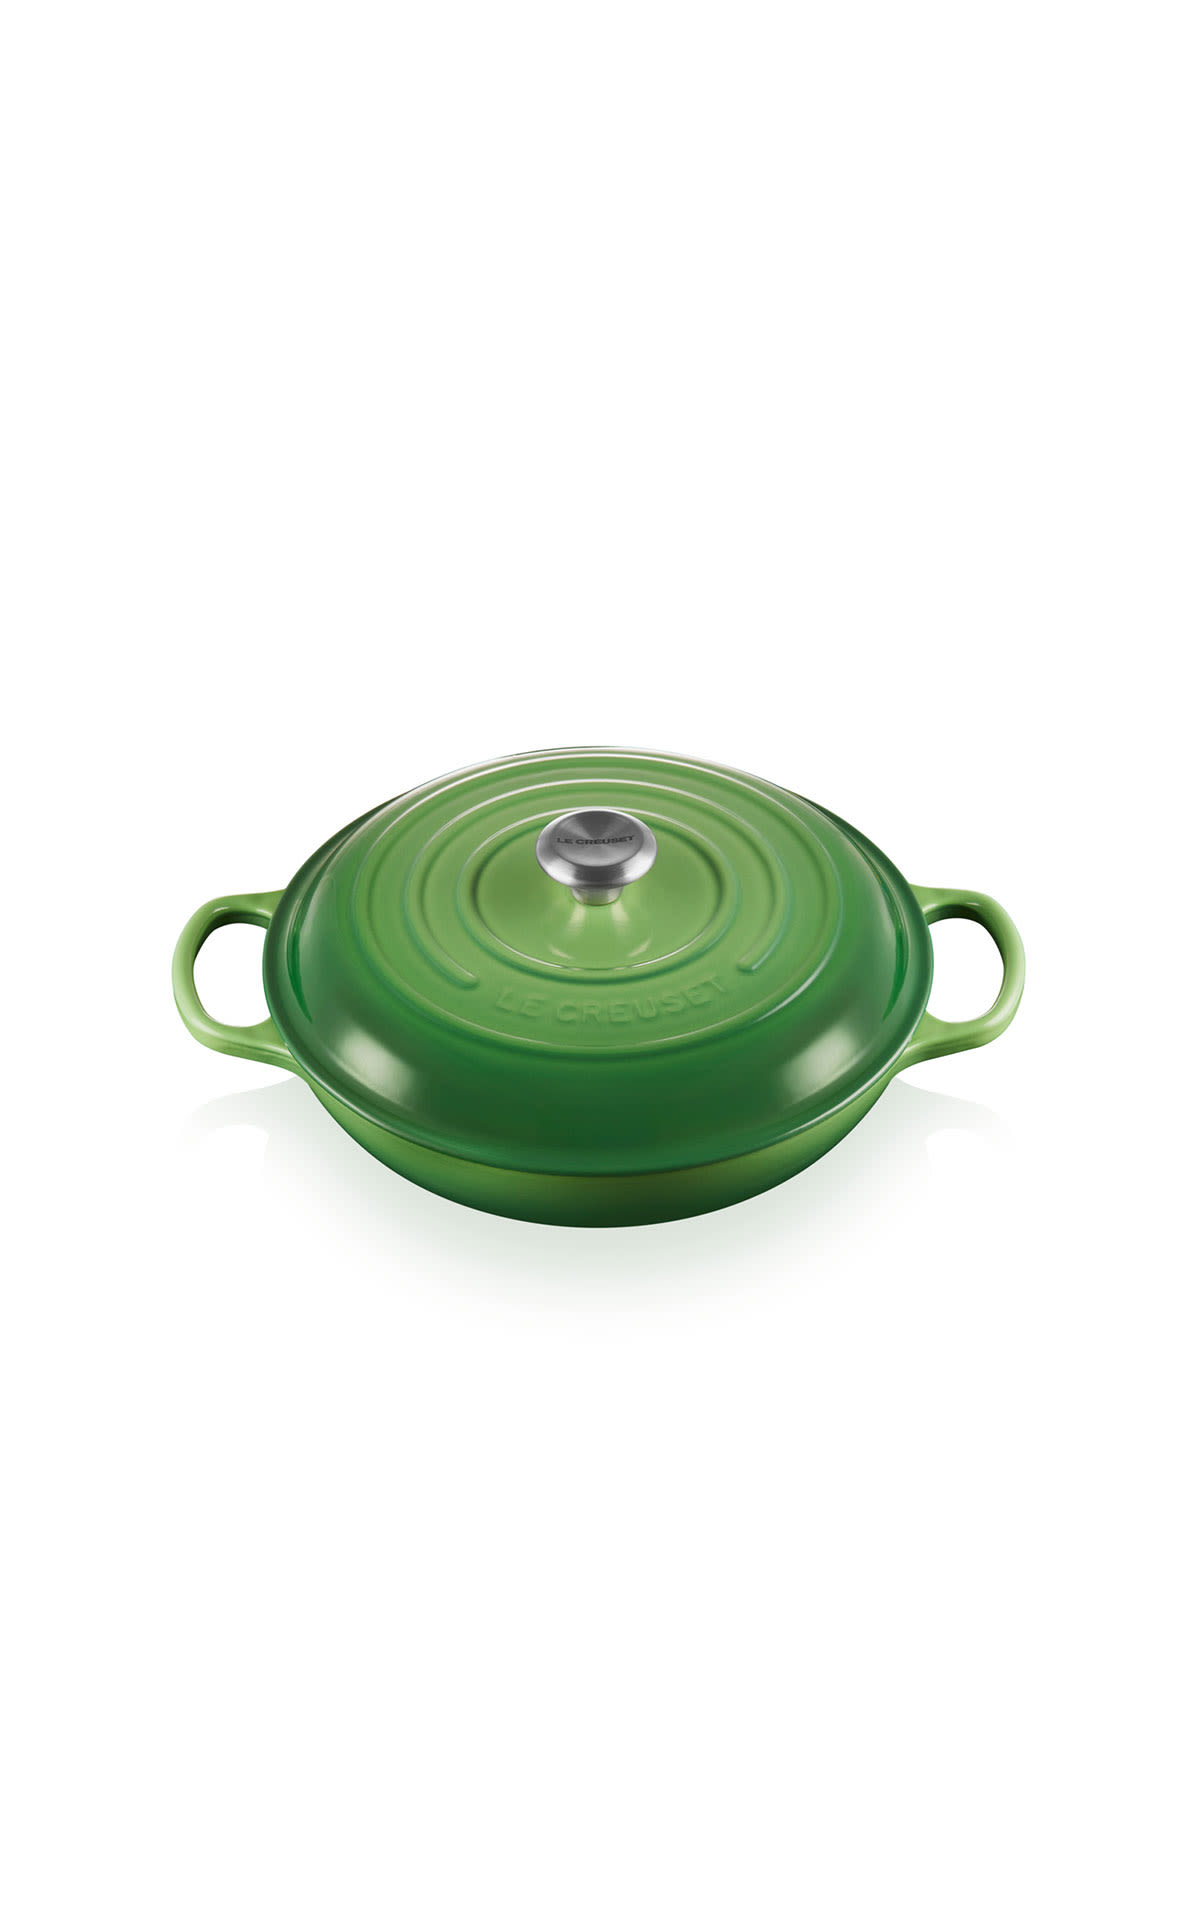 Le Creuset 30cm Signature shallow casserole bamboo green from Bicester Village